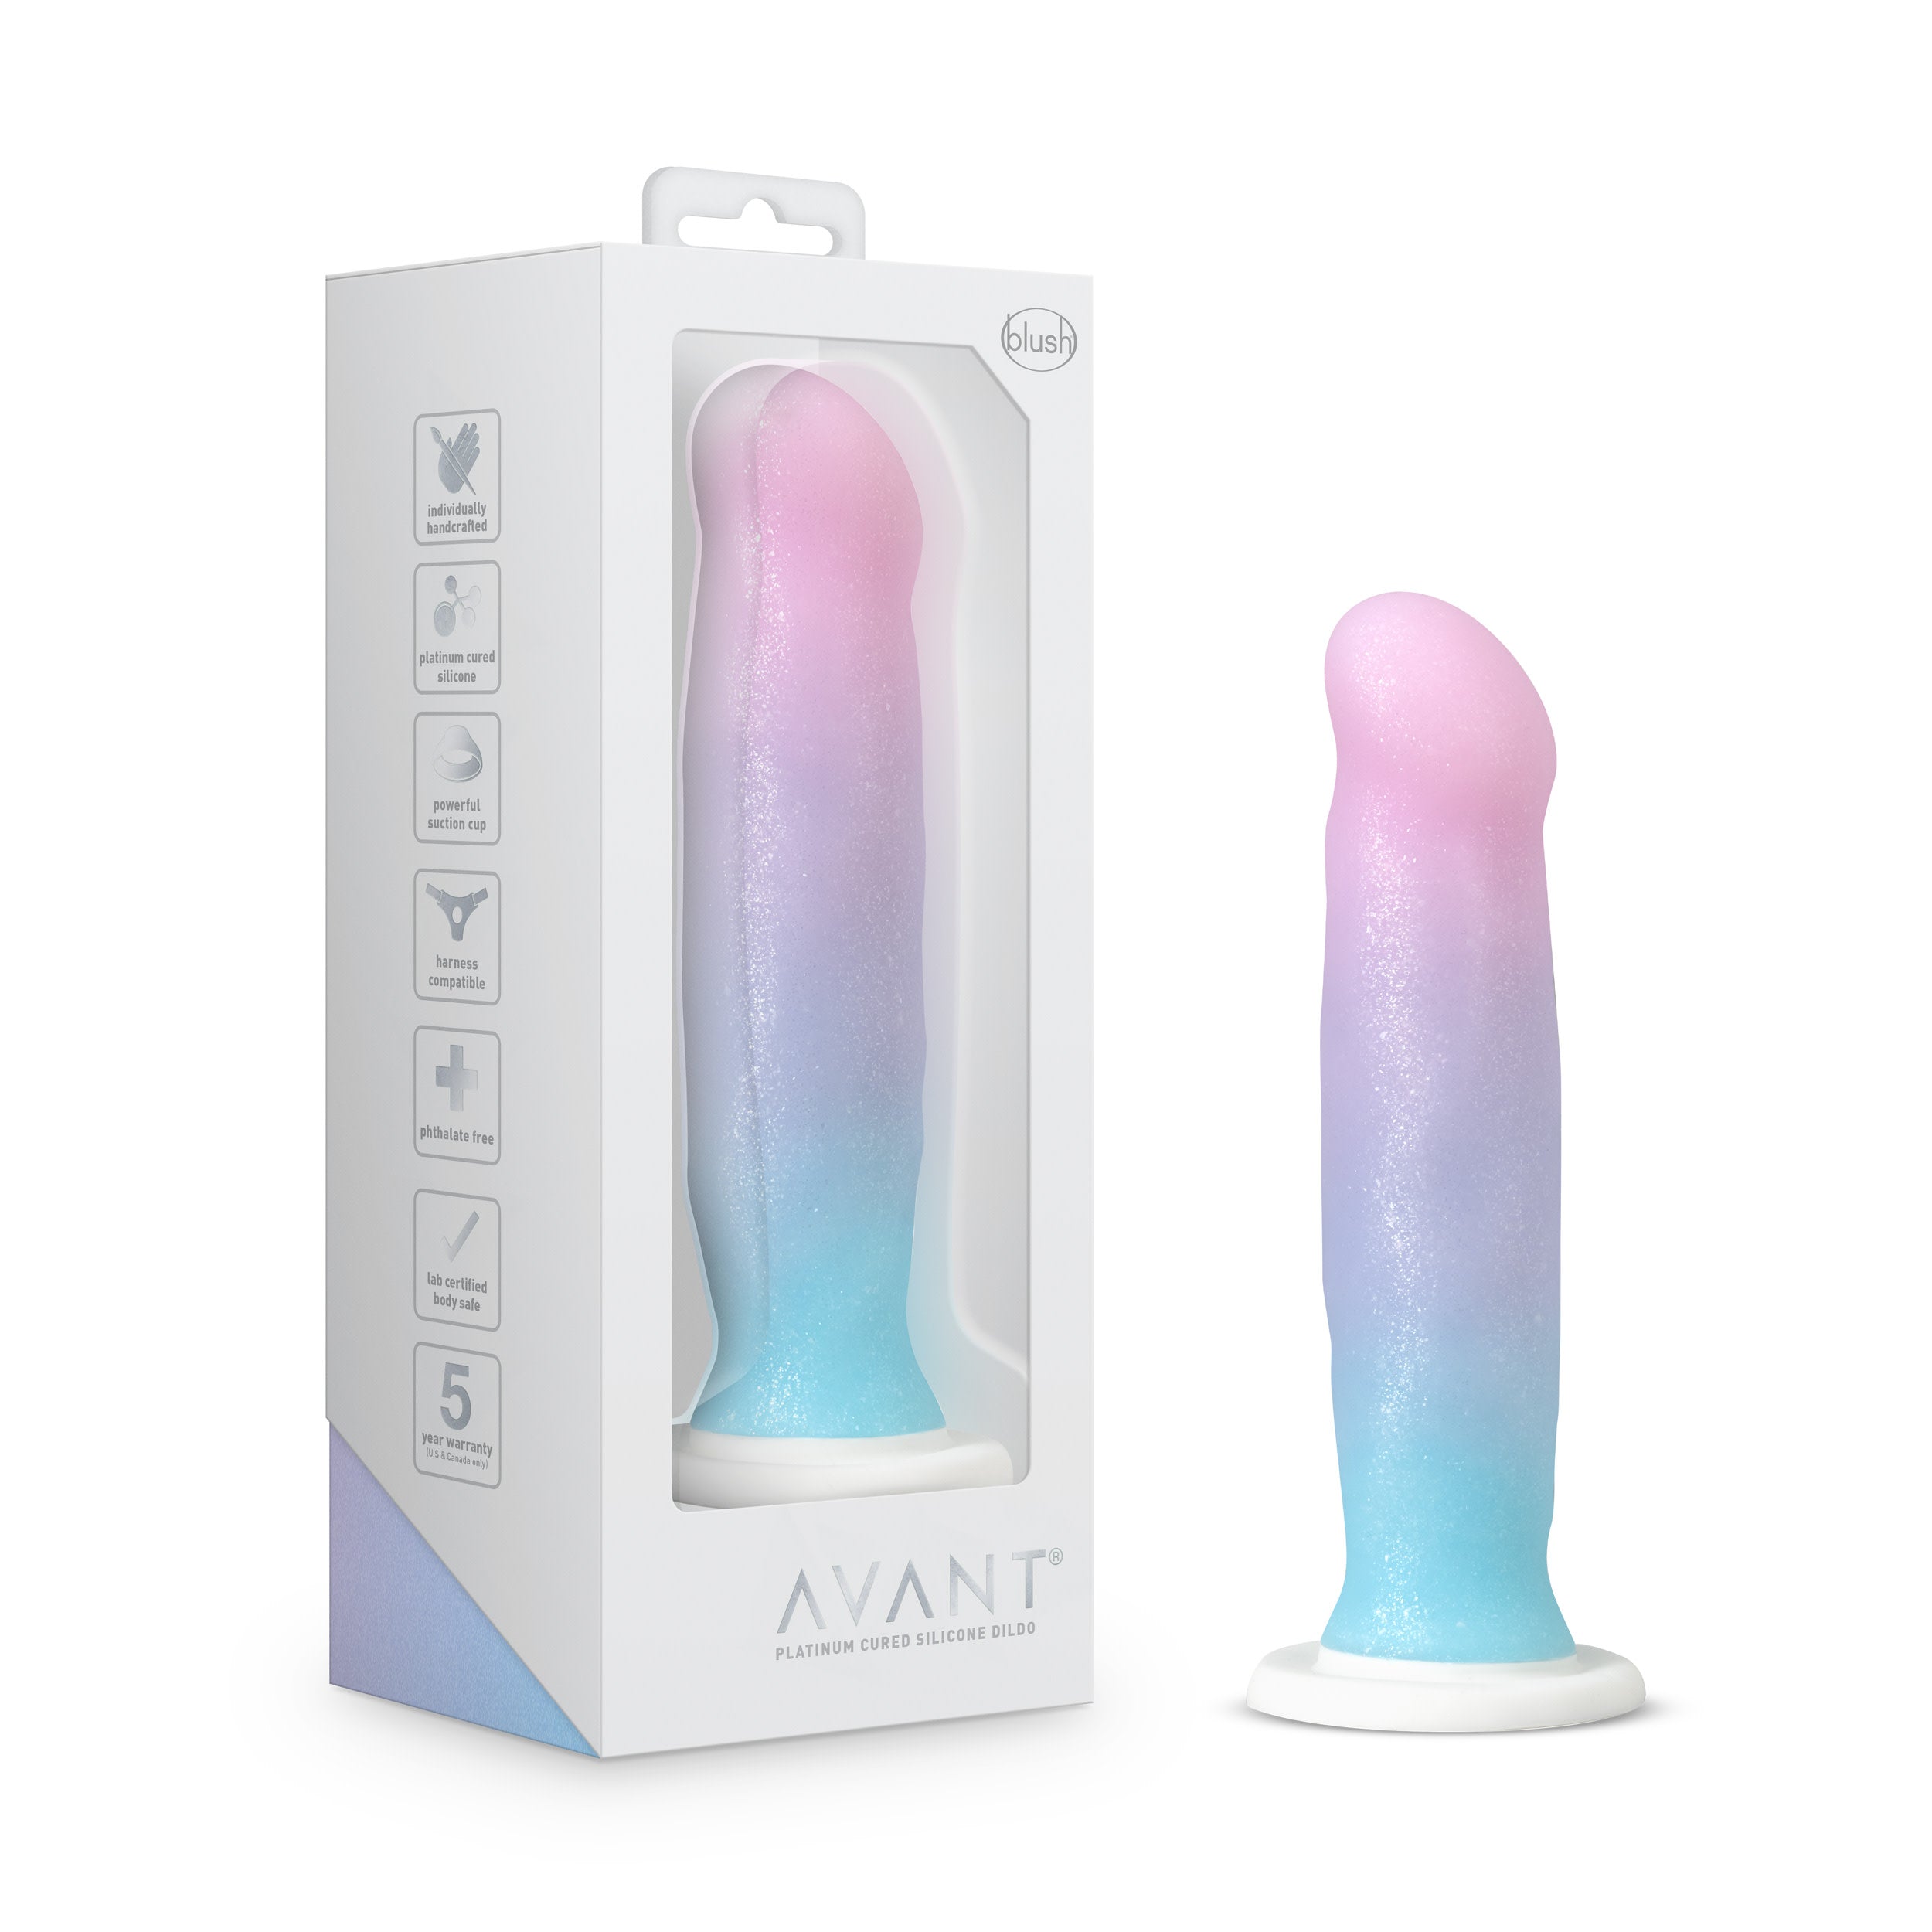 Blush Lucky dildo next to packaging